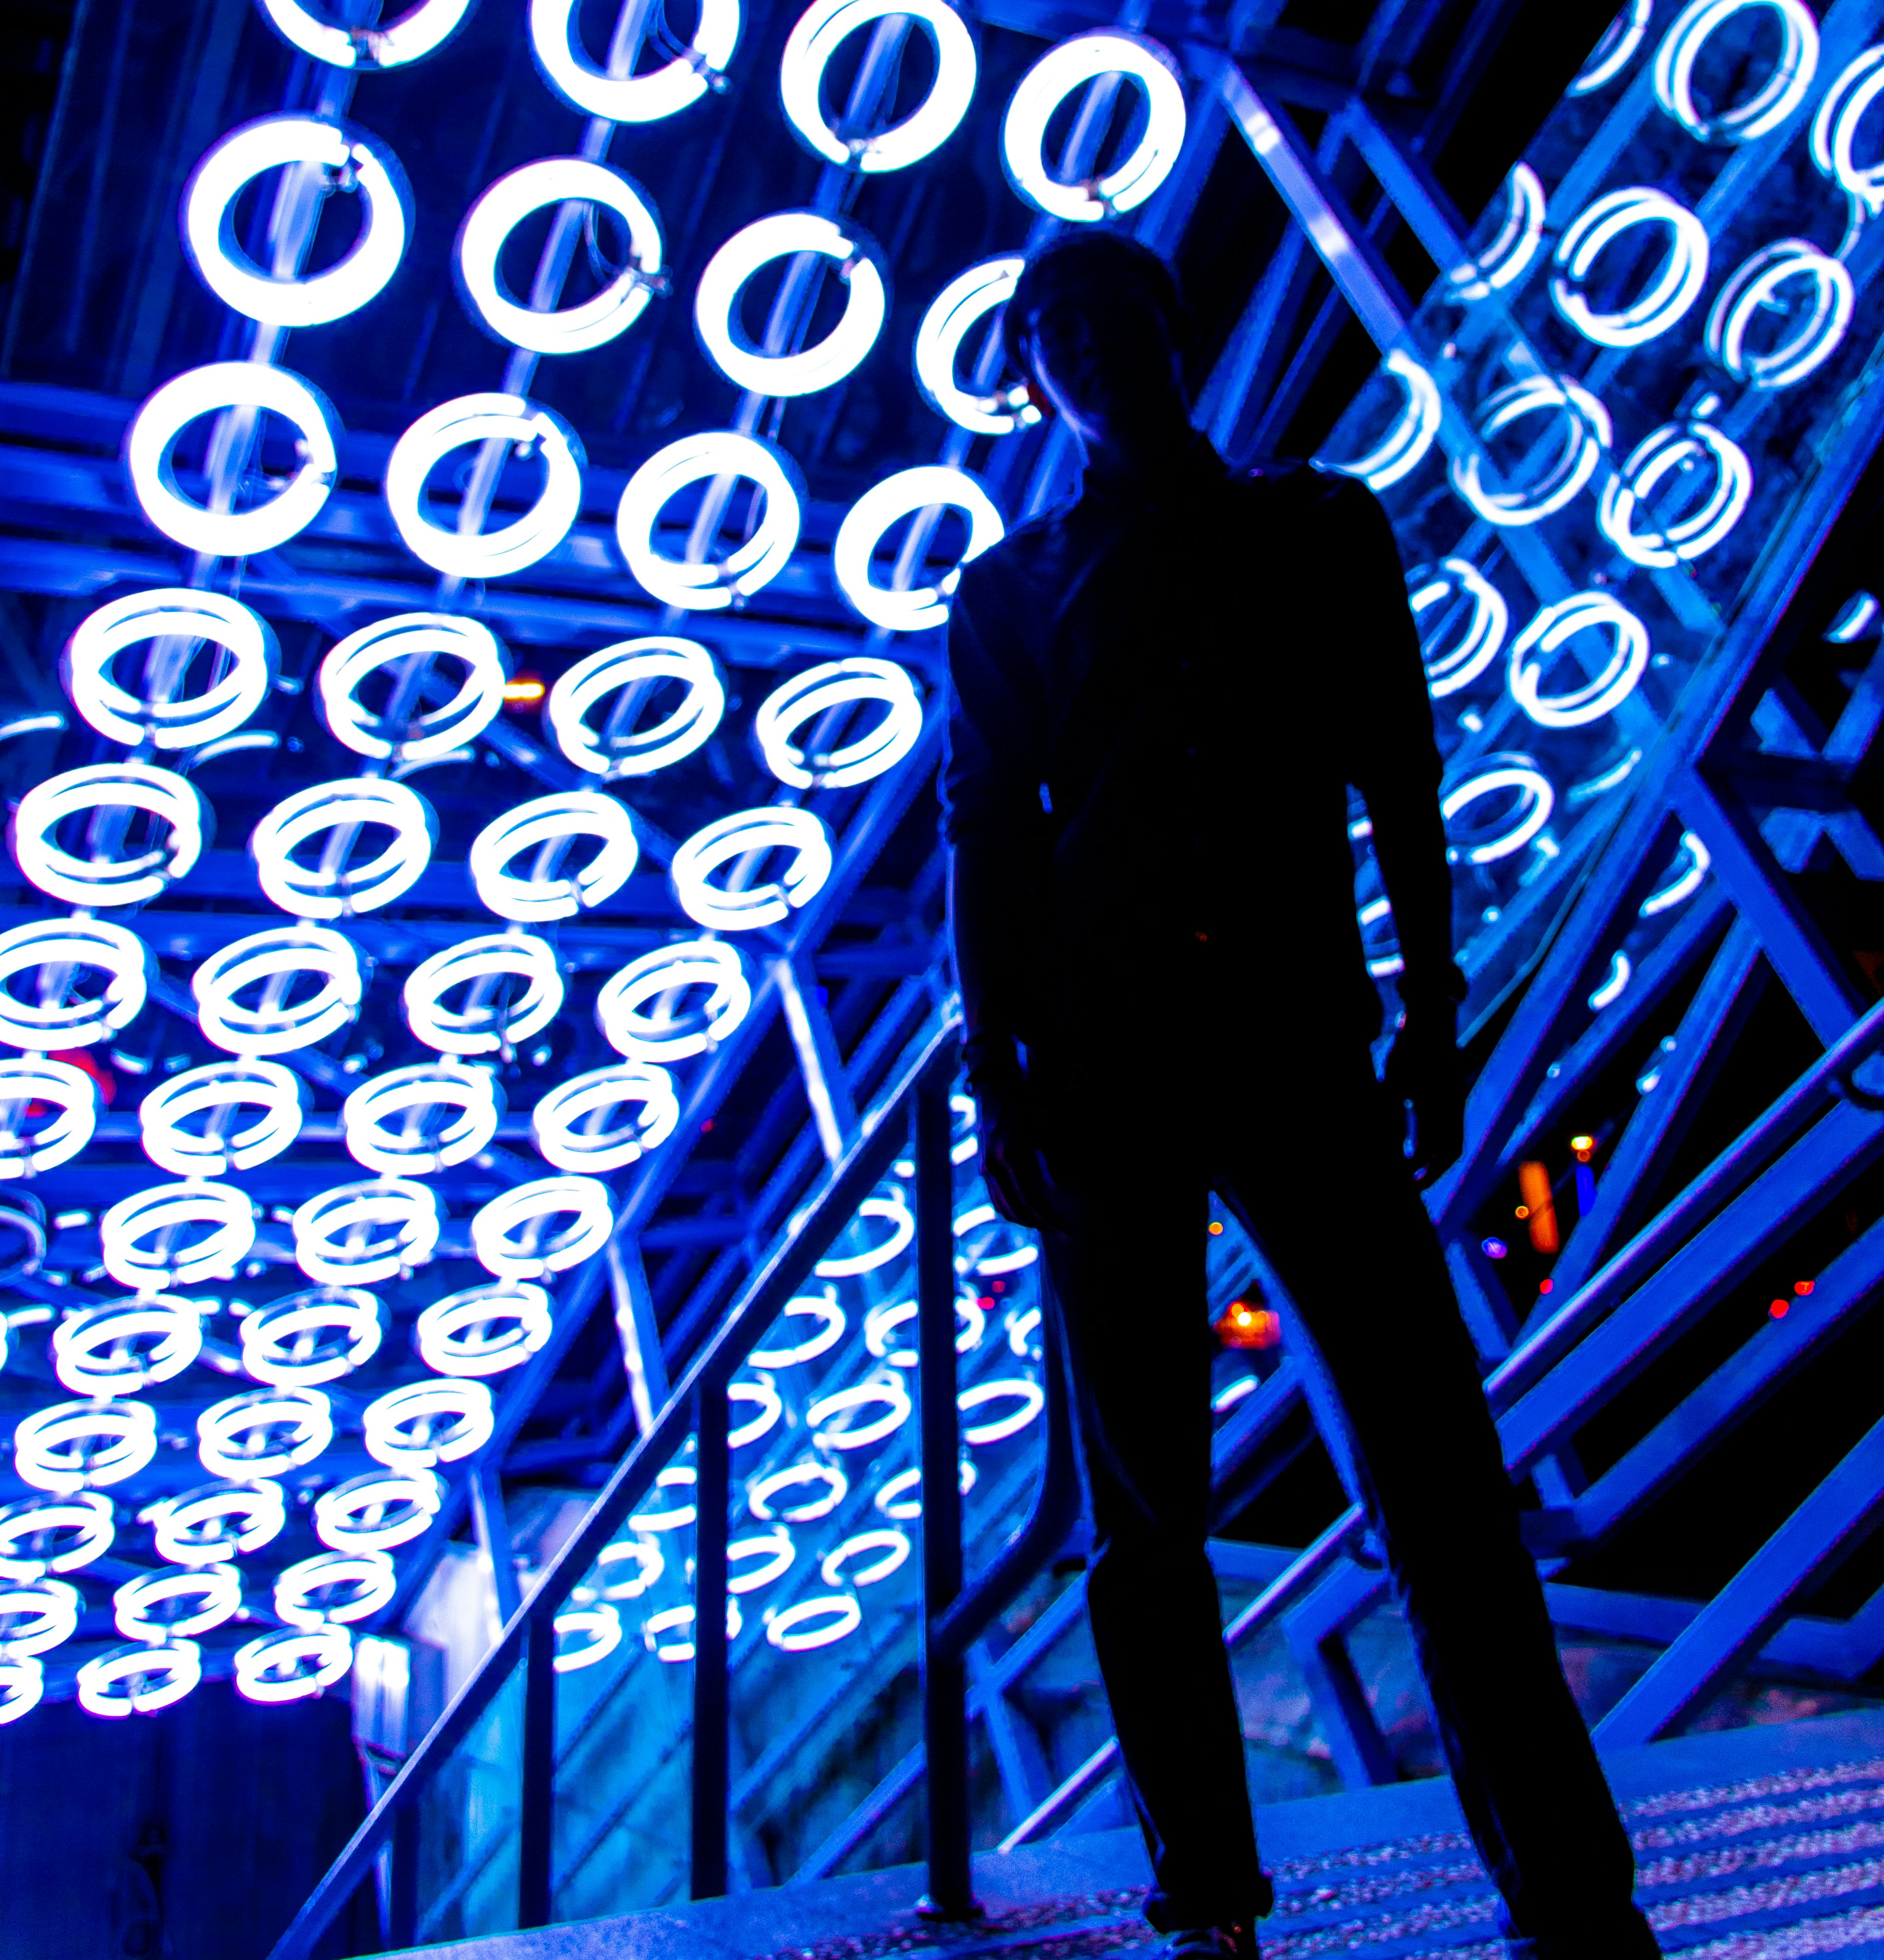 great photo recipe,how to photograph man standing near handrail under neon lights